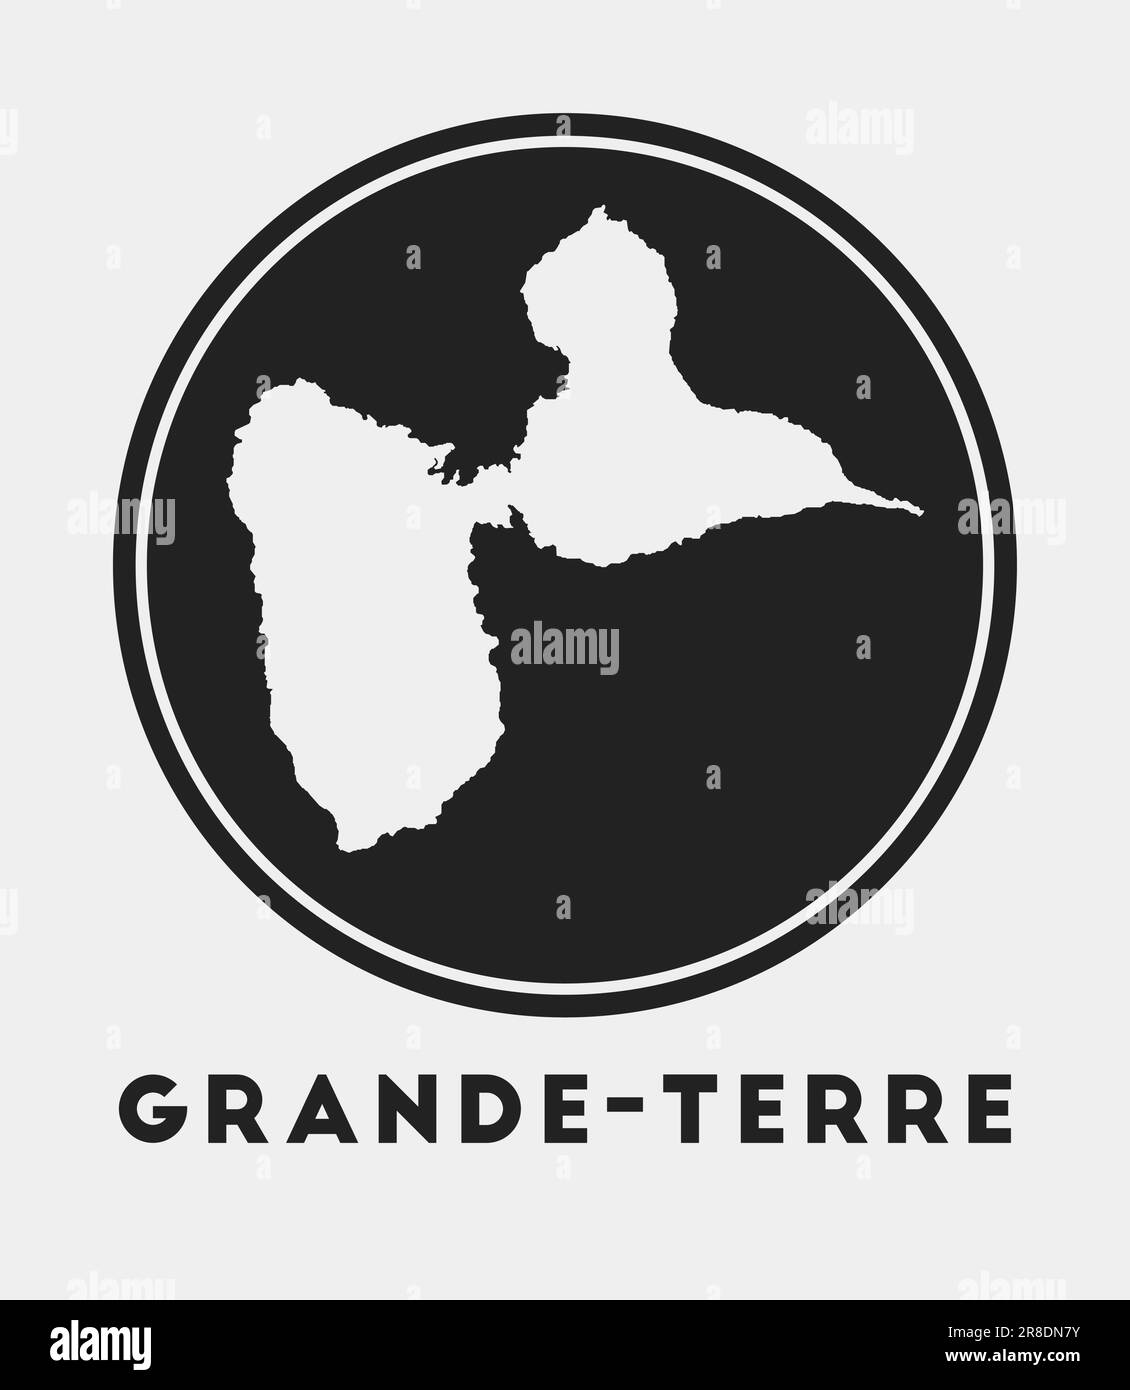 Grande-Terre icon. Round logo with island map and title. Stylish Grande ...